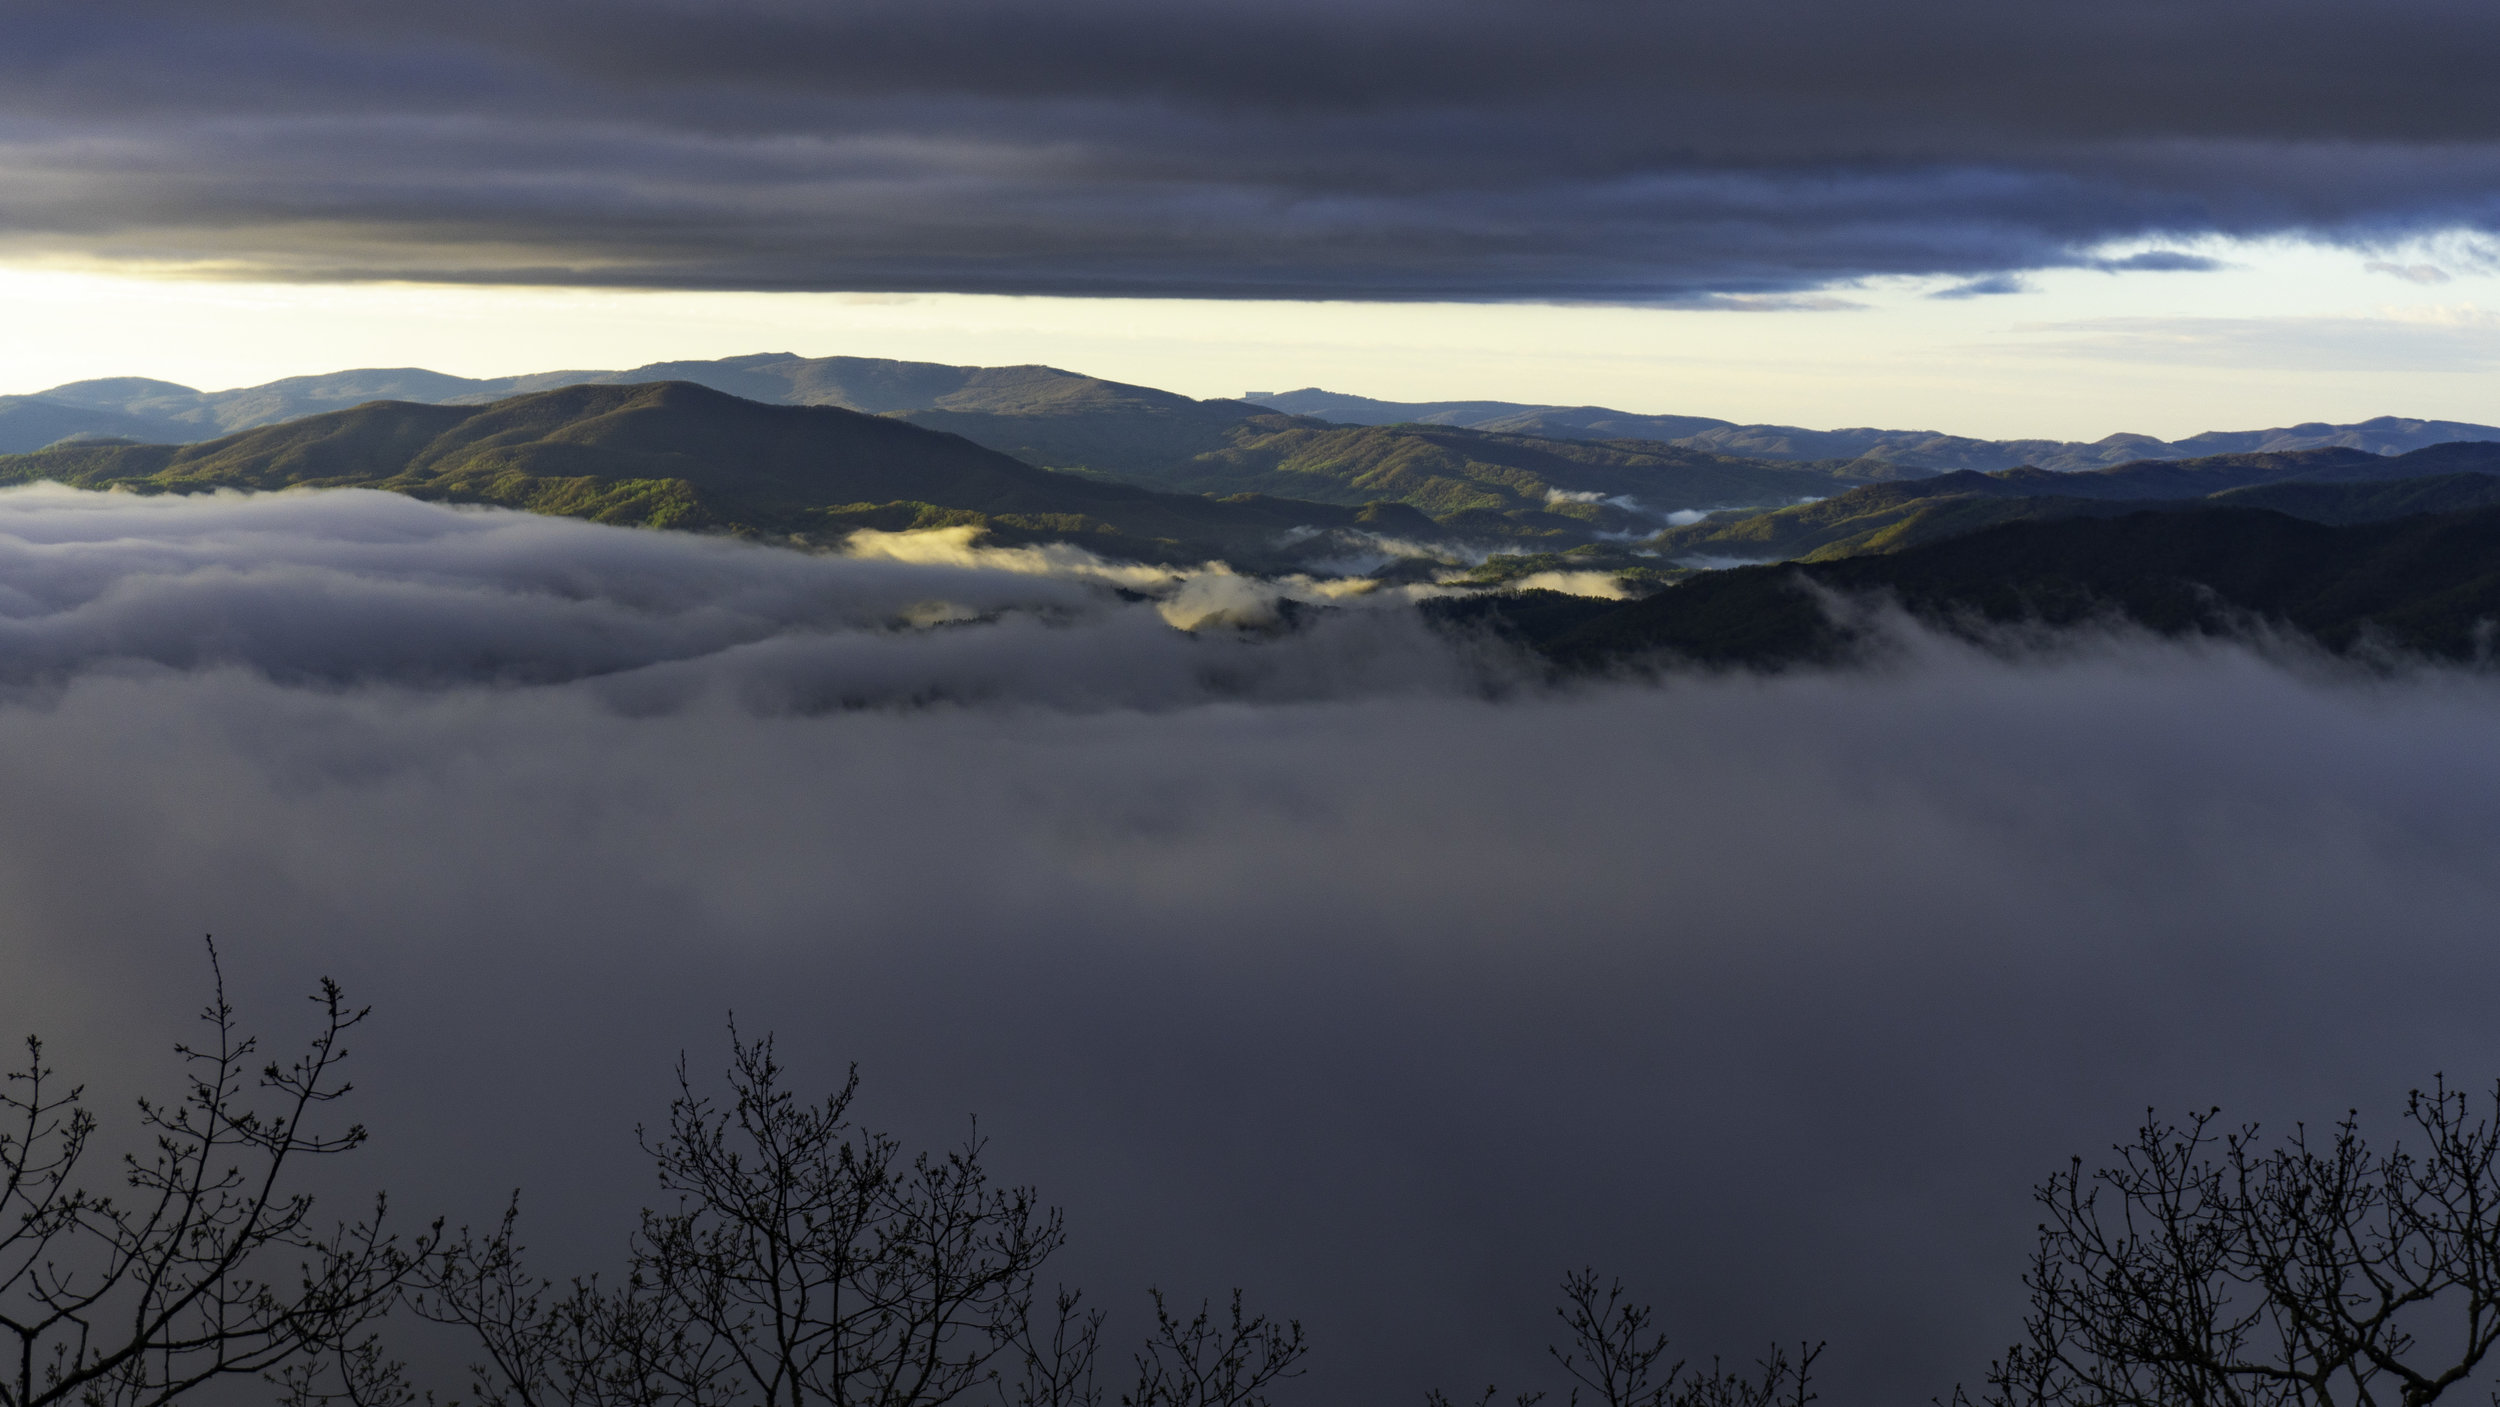  Morning view as clouds roll through the valley 3 